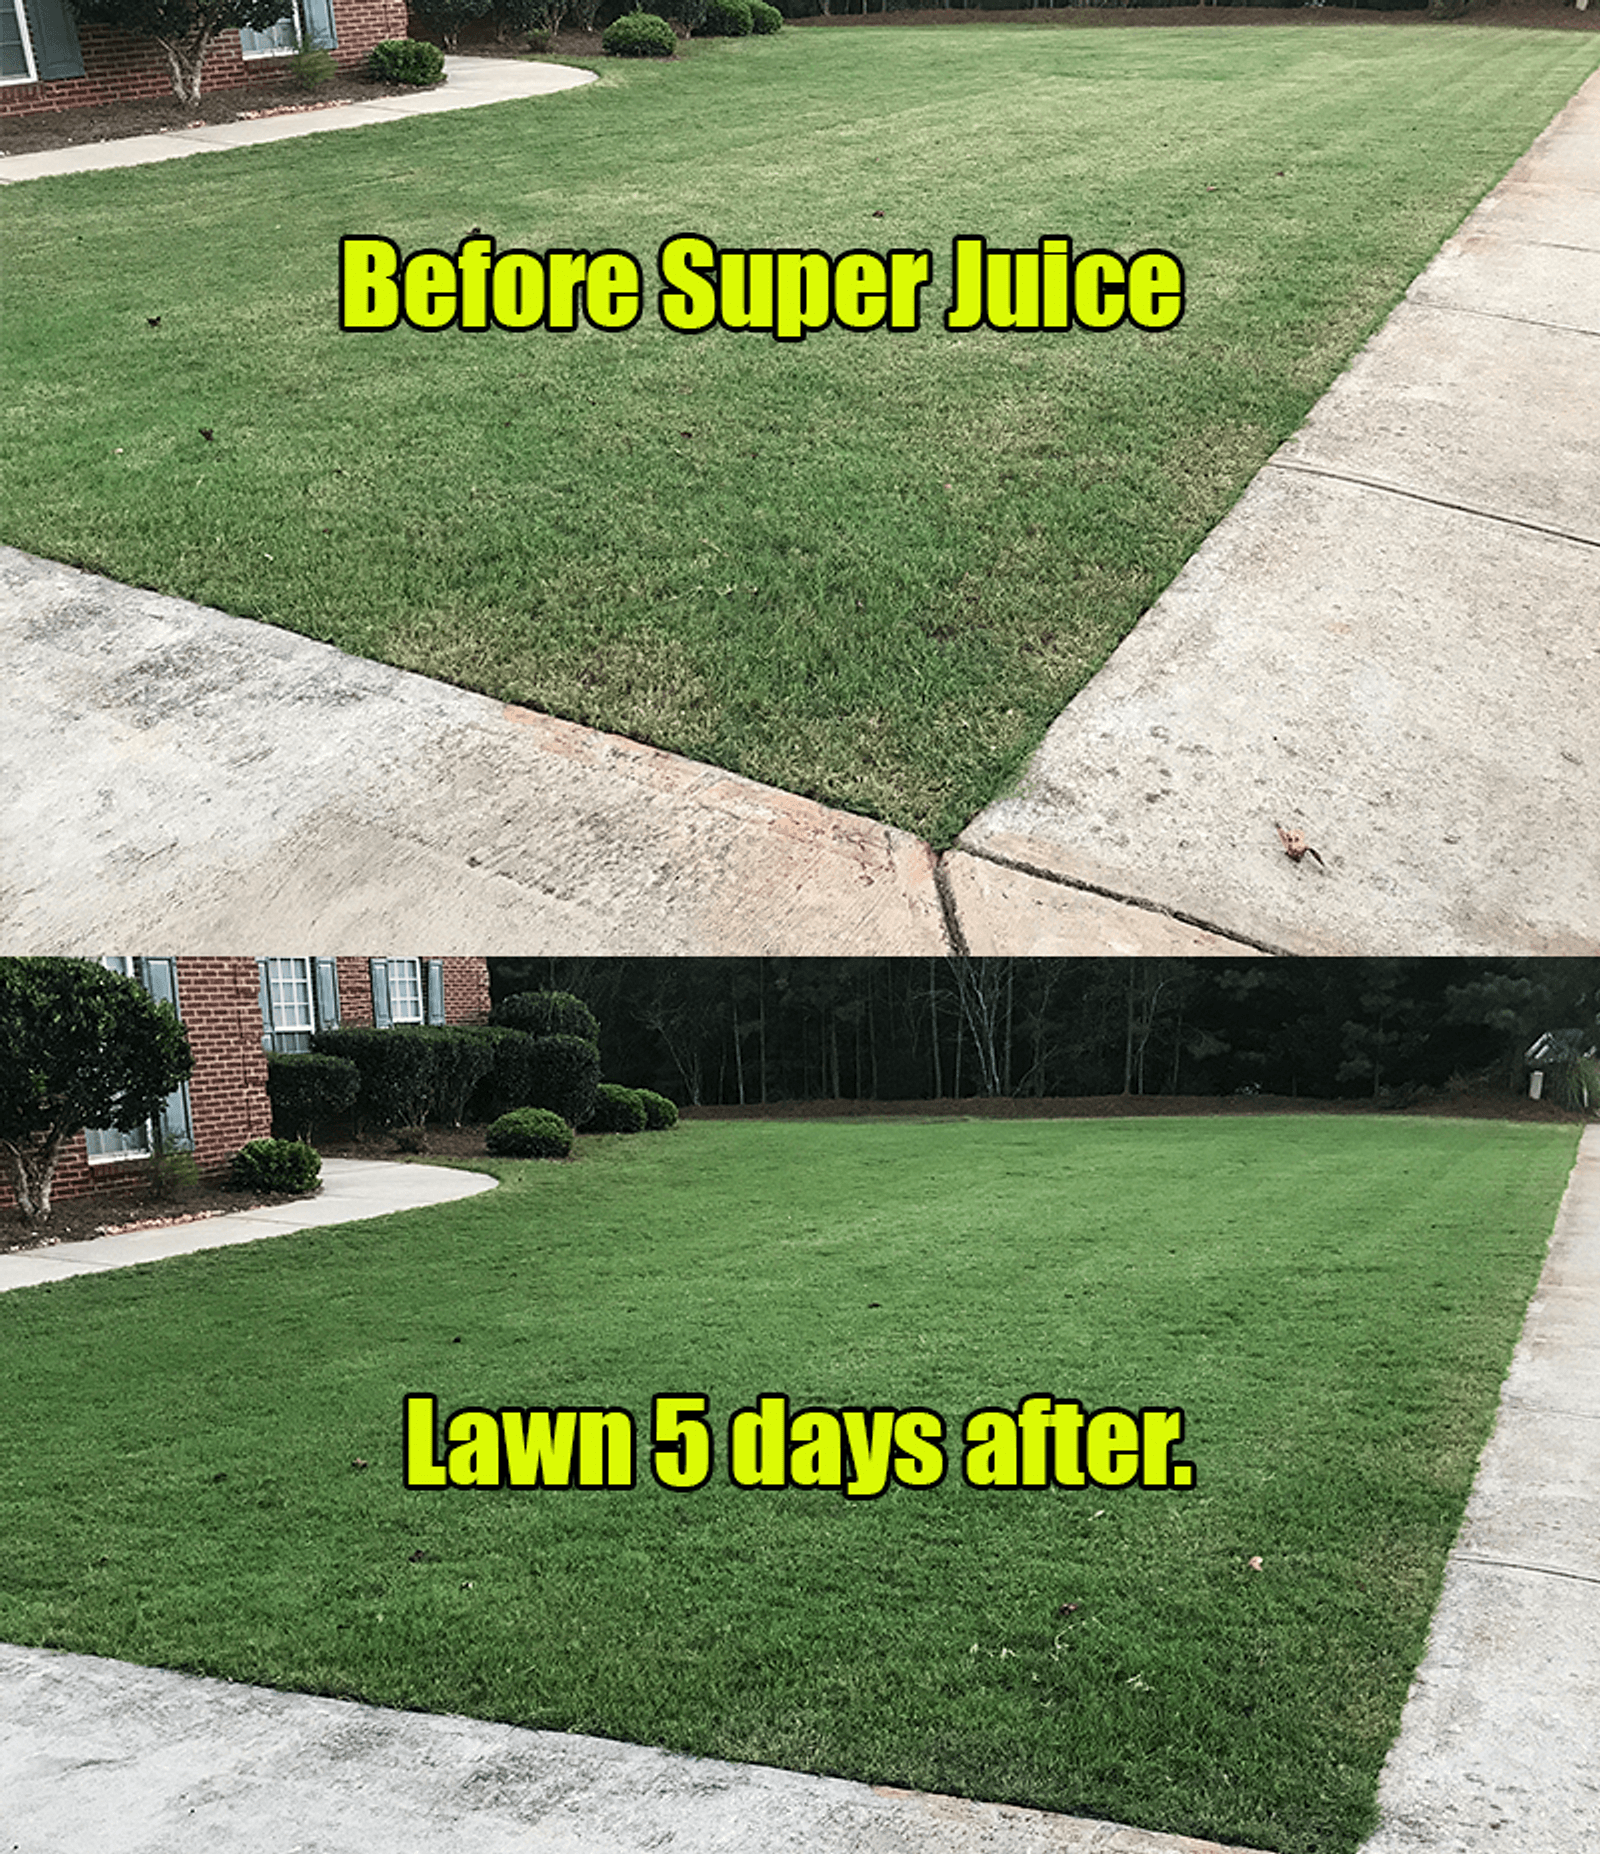 Super Juice Before and After Lawn